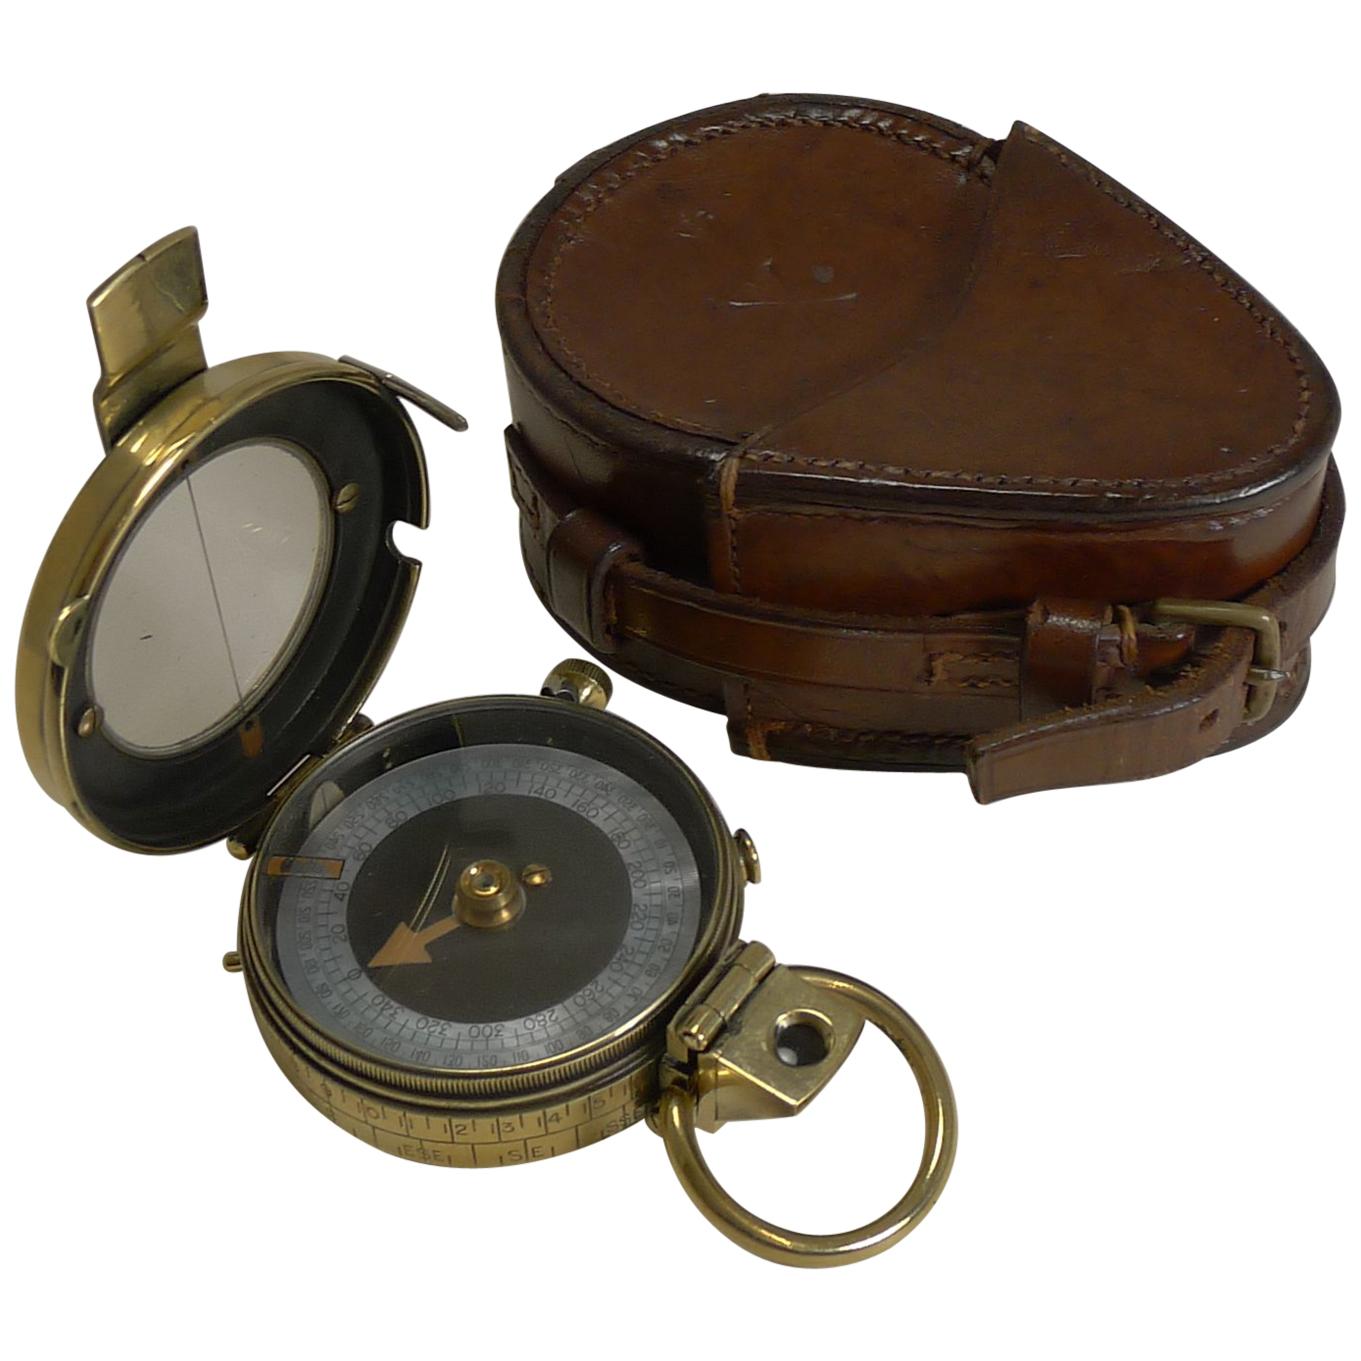 WW1 1917 British Army Officer's Compass Verner's Patent MK VIII by French Ltd